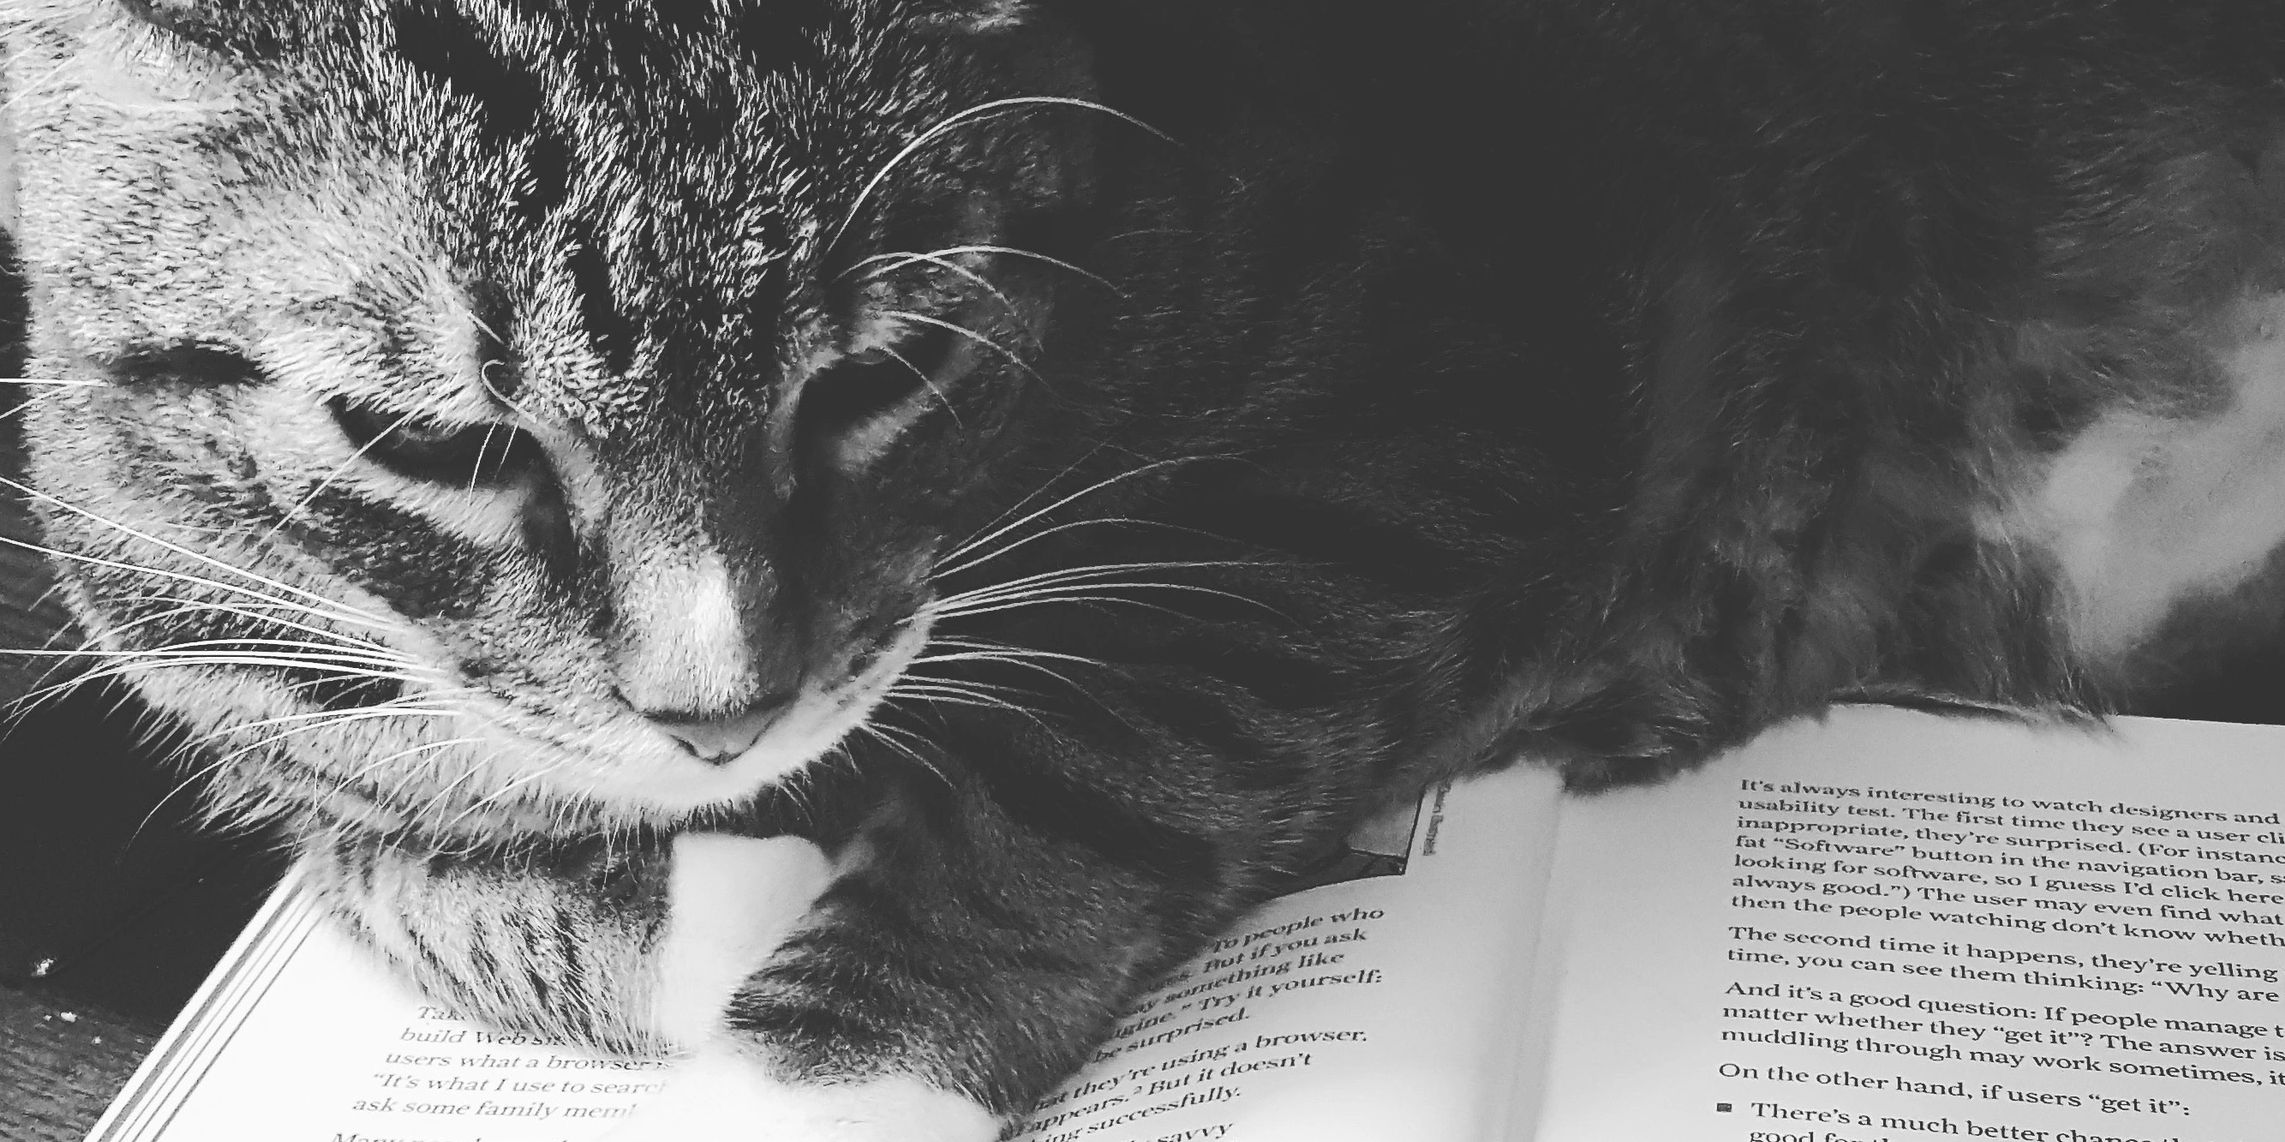 Cats and books